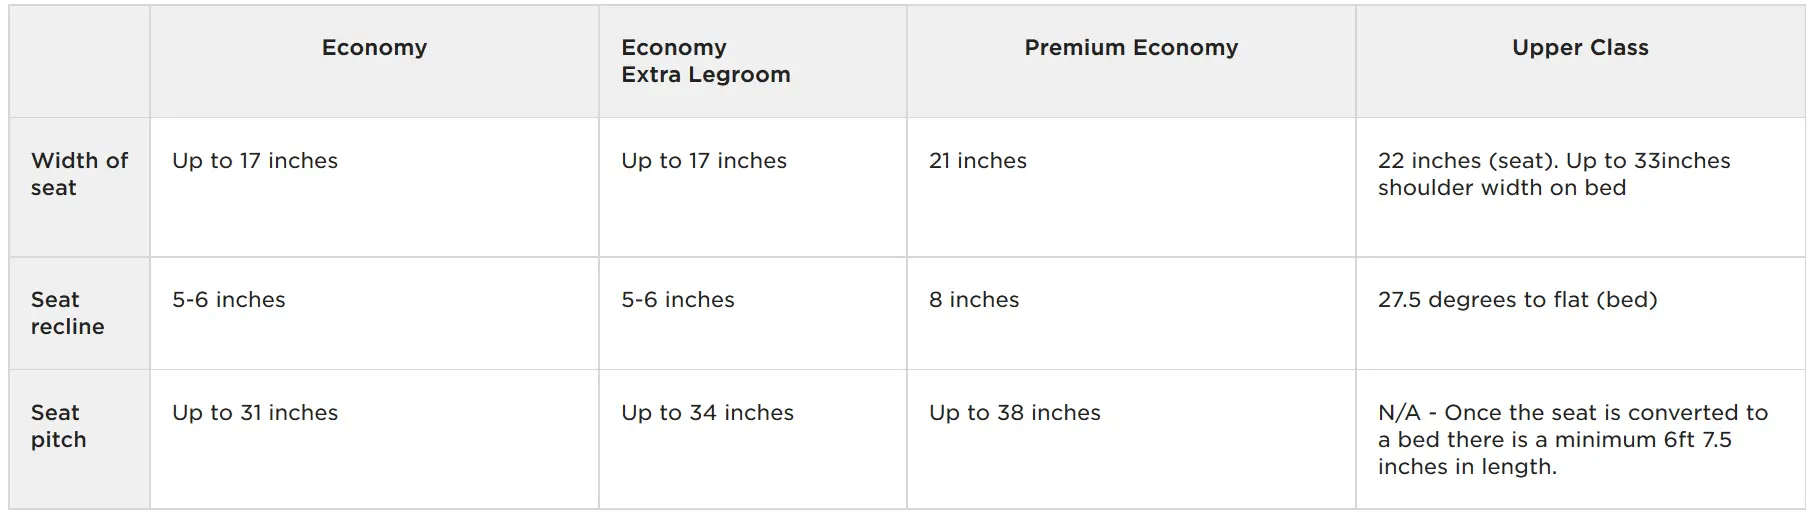 find out what the seat dimension you get when booking with a Virgin Atlantic Promo Code